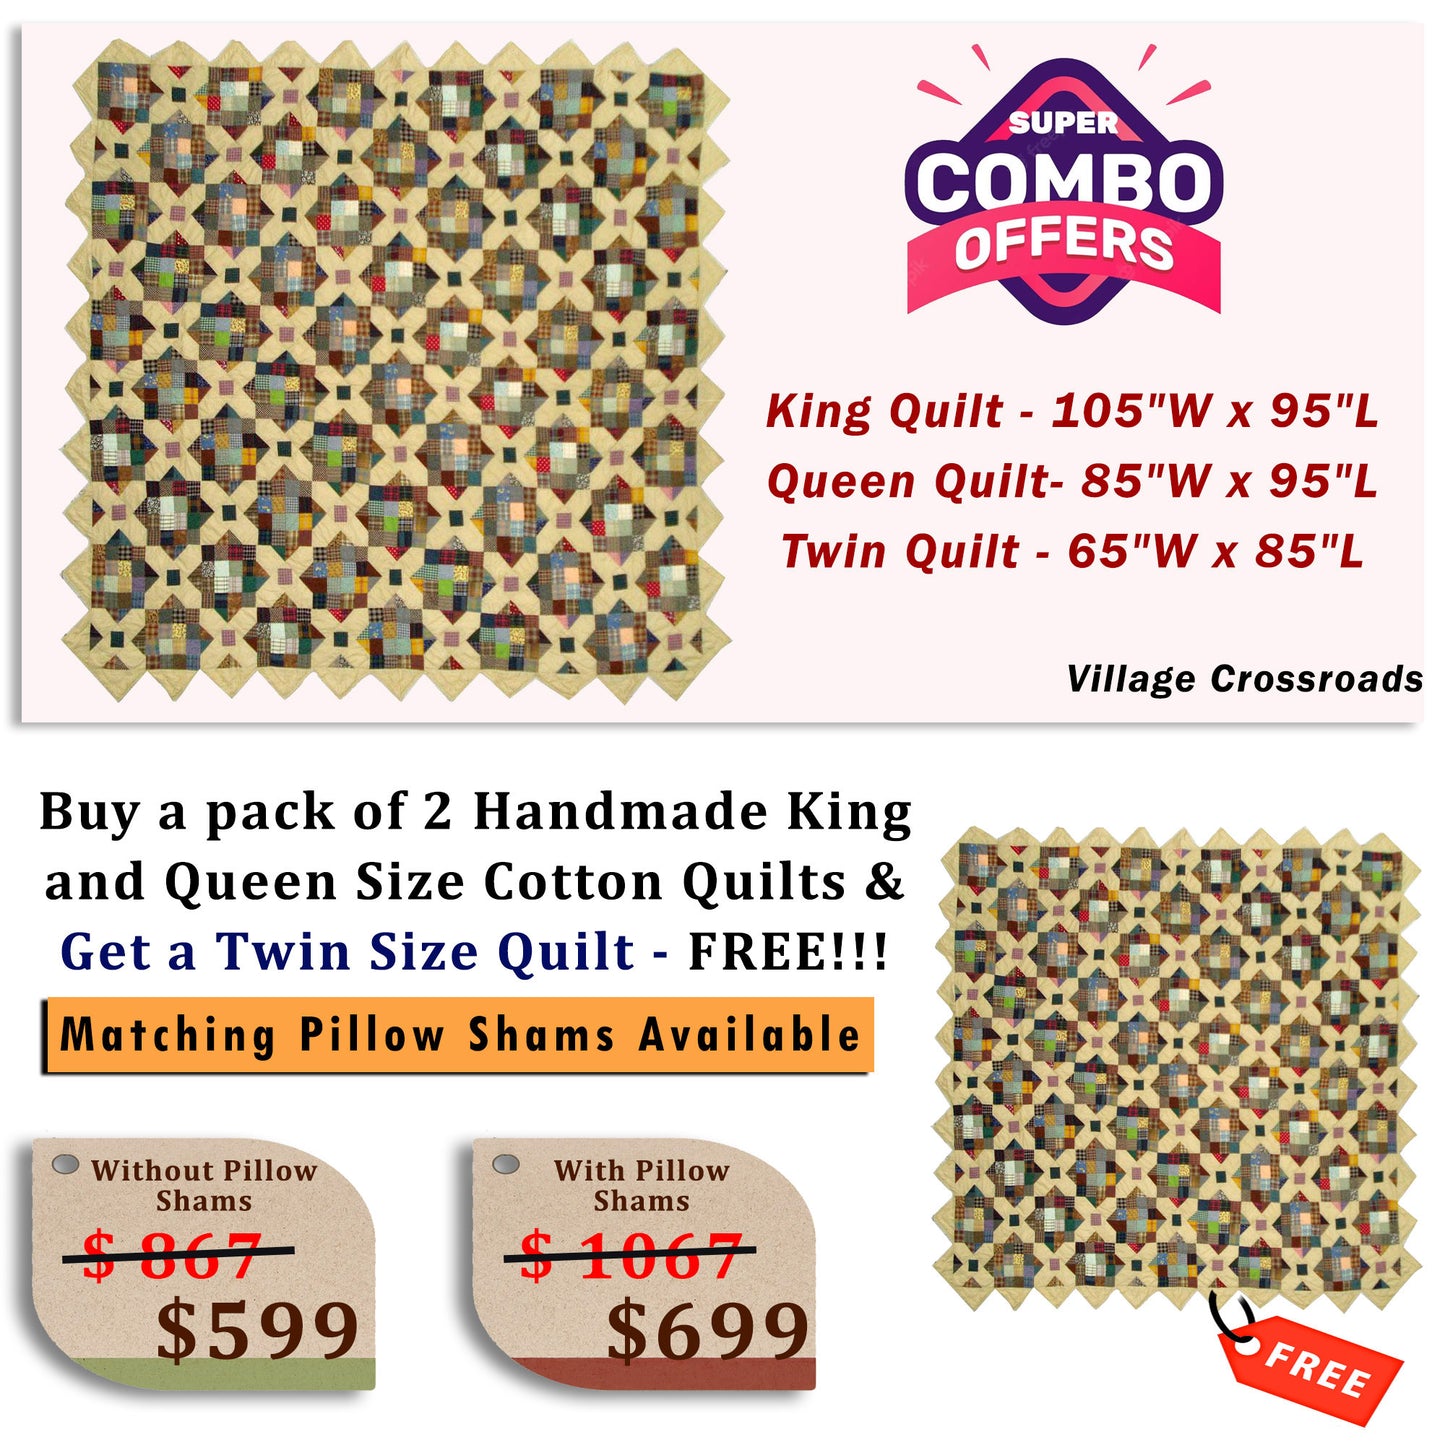 Village Crossroads - Buy a pack of King and Queen Size Quilt, and get a Twin Size Quilt FREE!!!